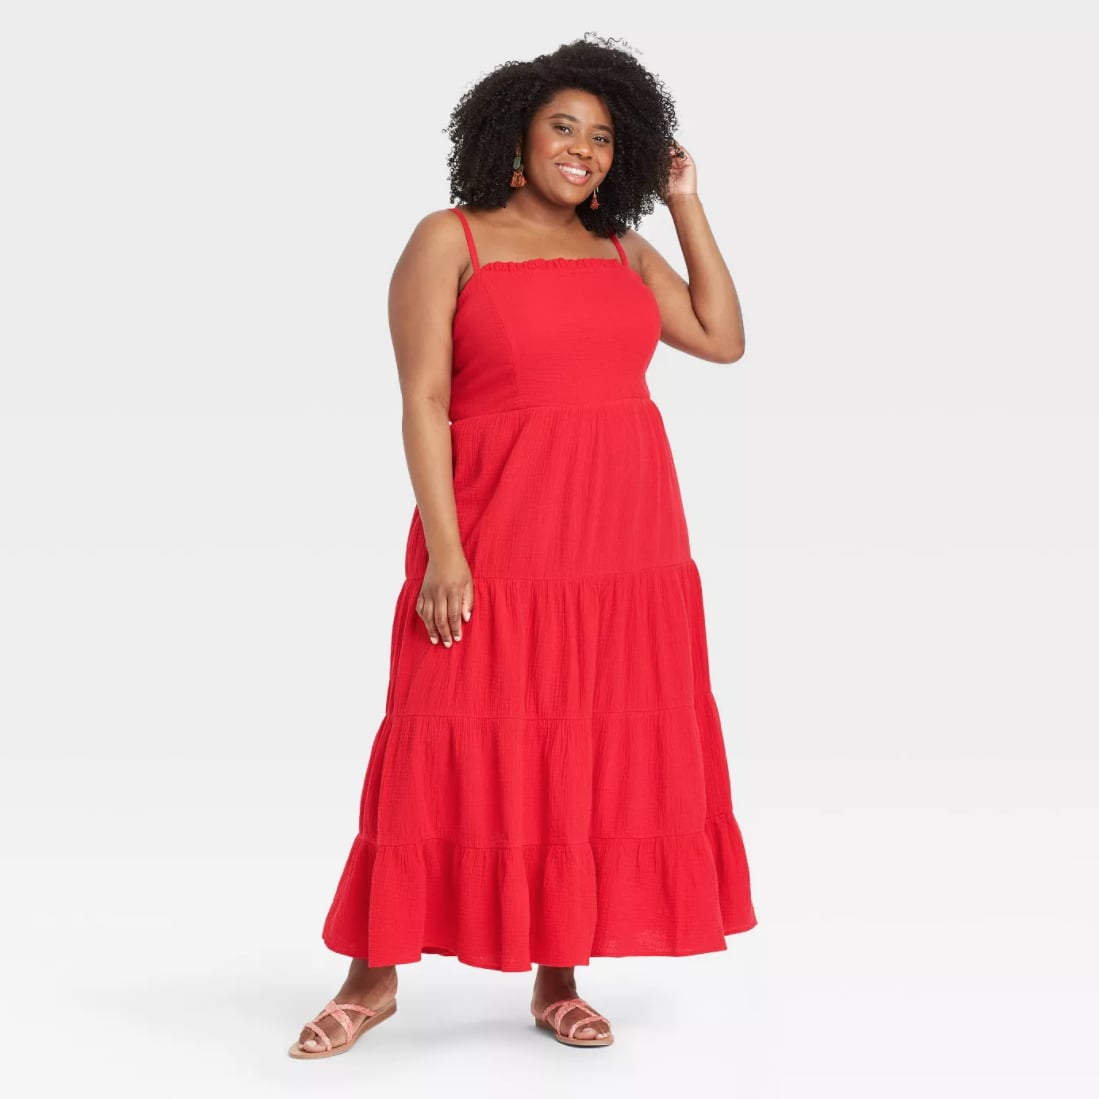 Comfortable Maxi Dress From Target, Editor Review